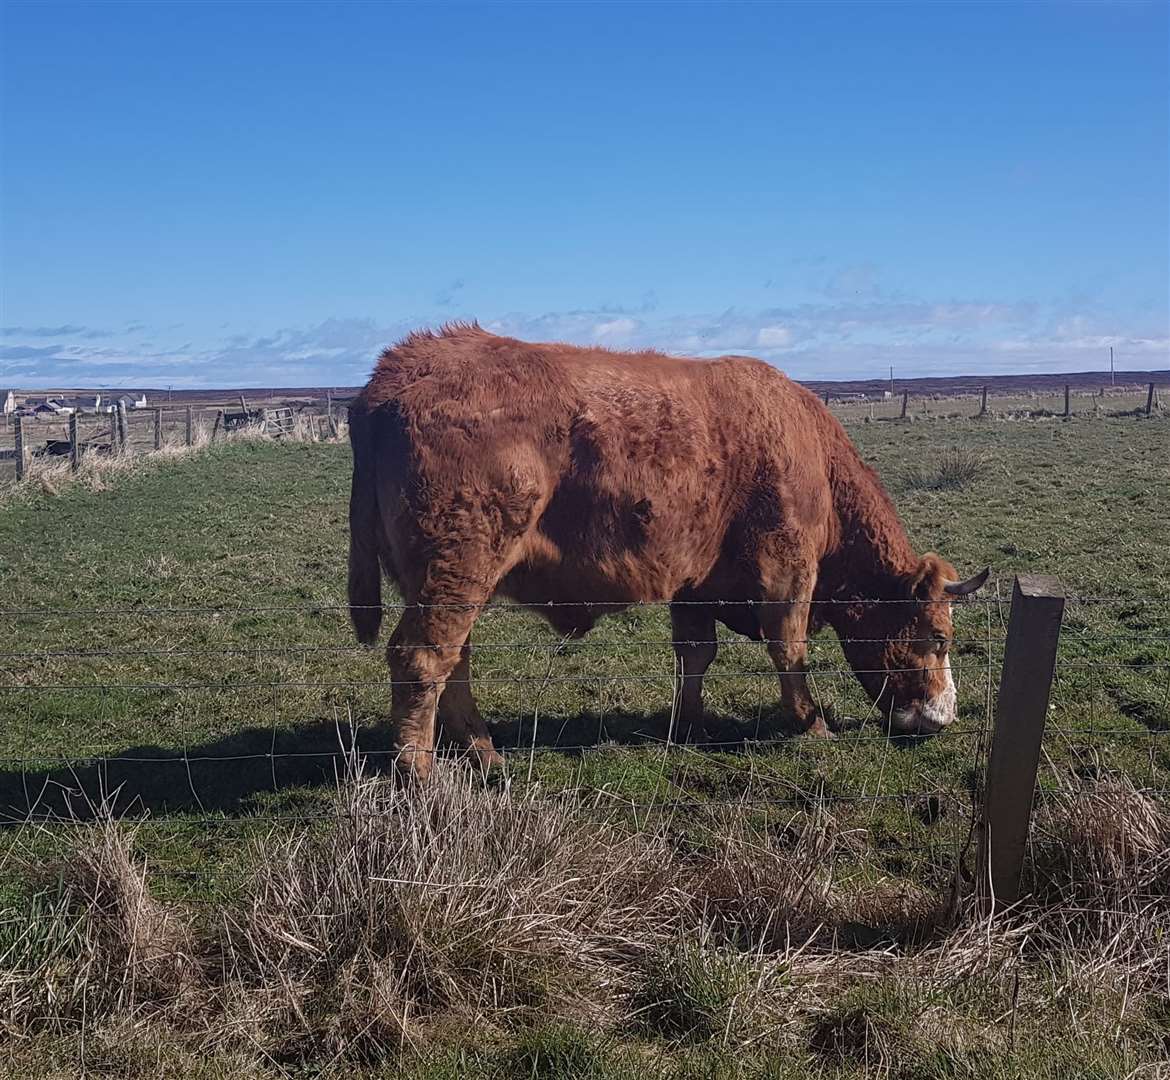 Greedy, the 26-year-old cow that gave up her bales!